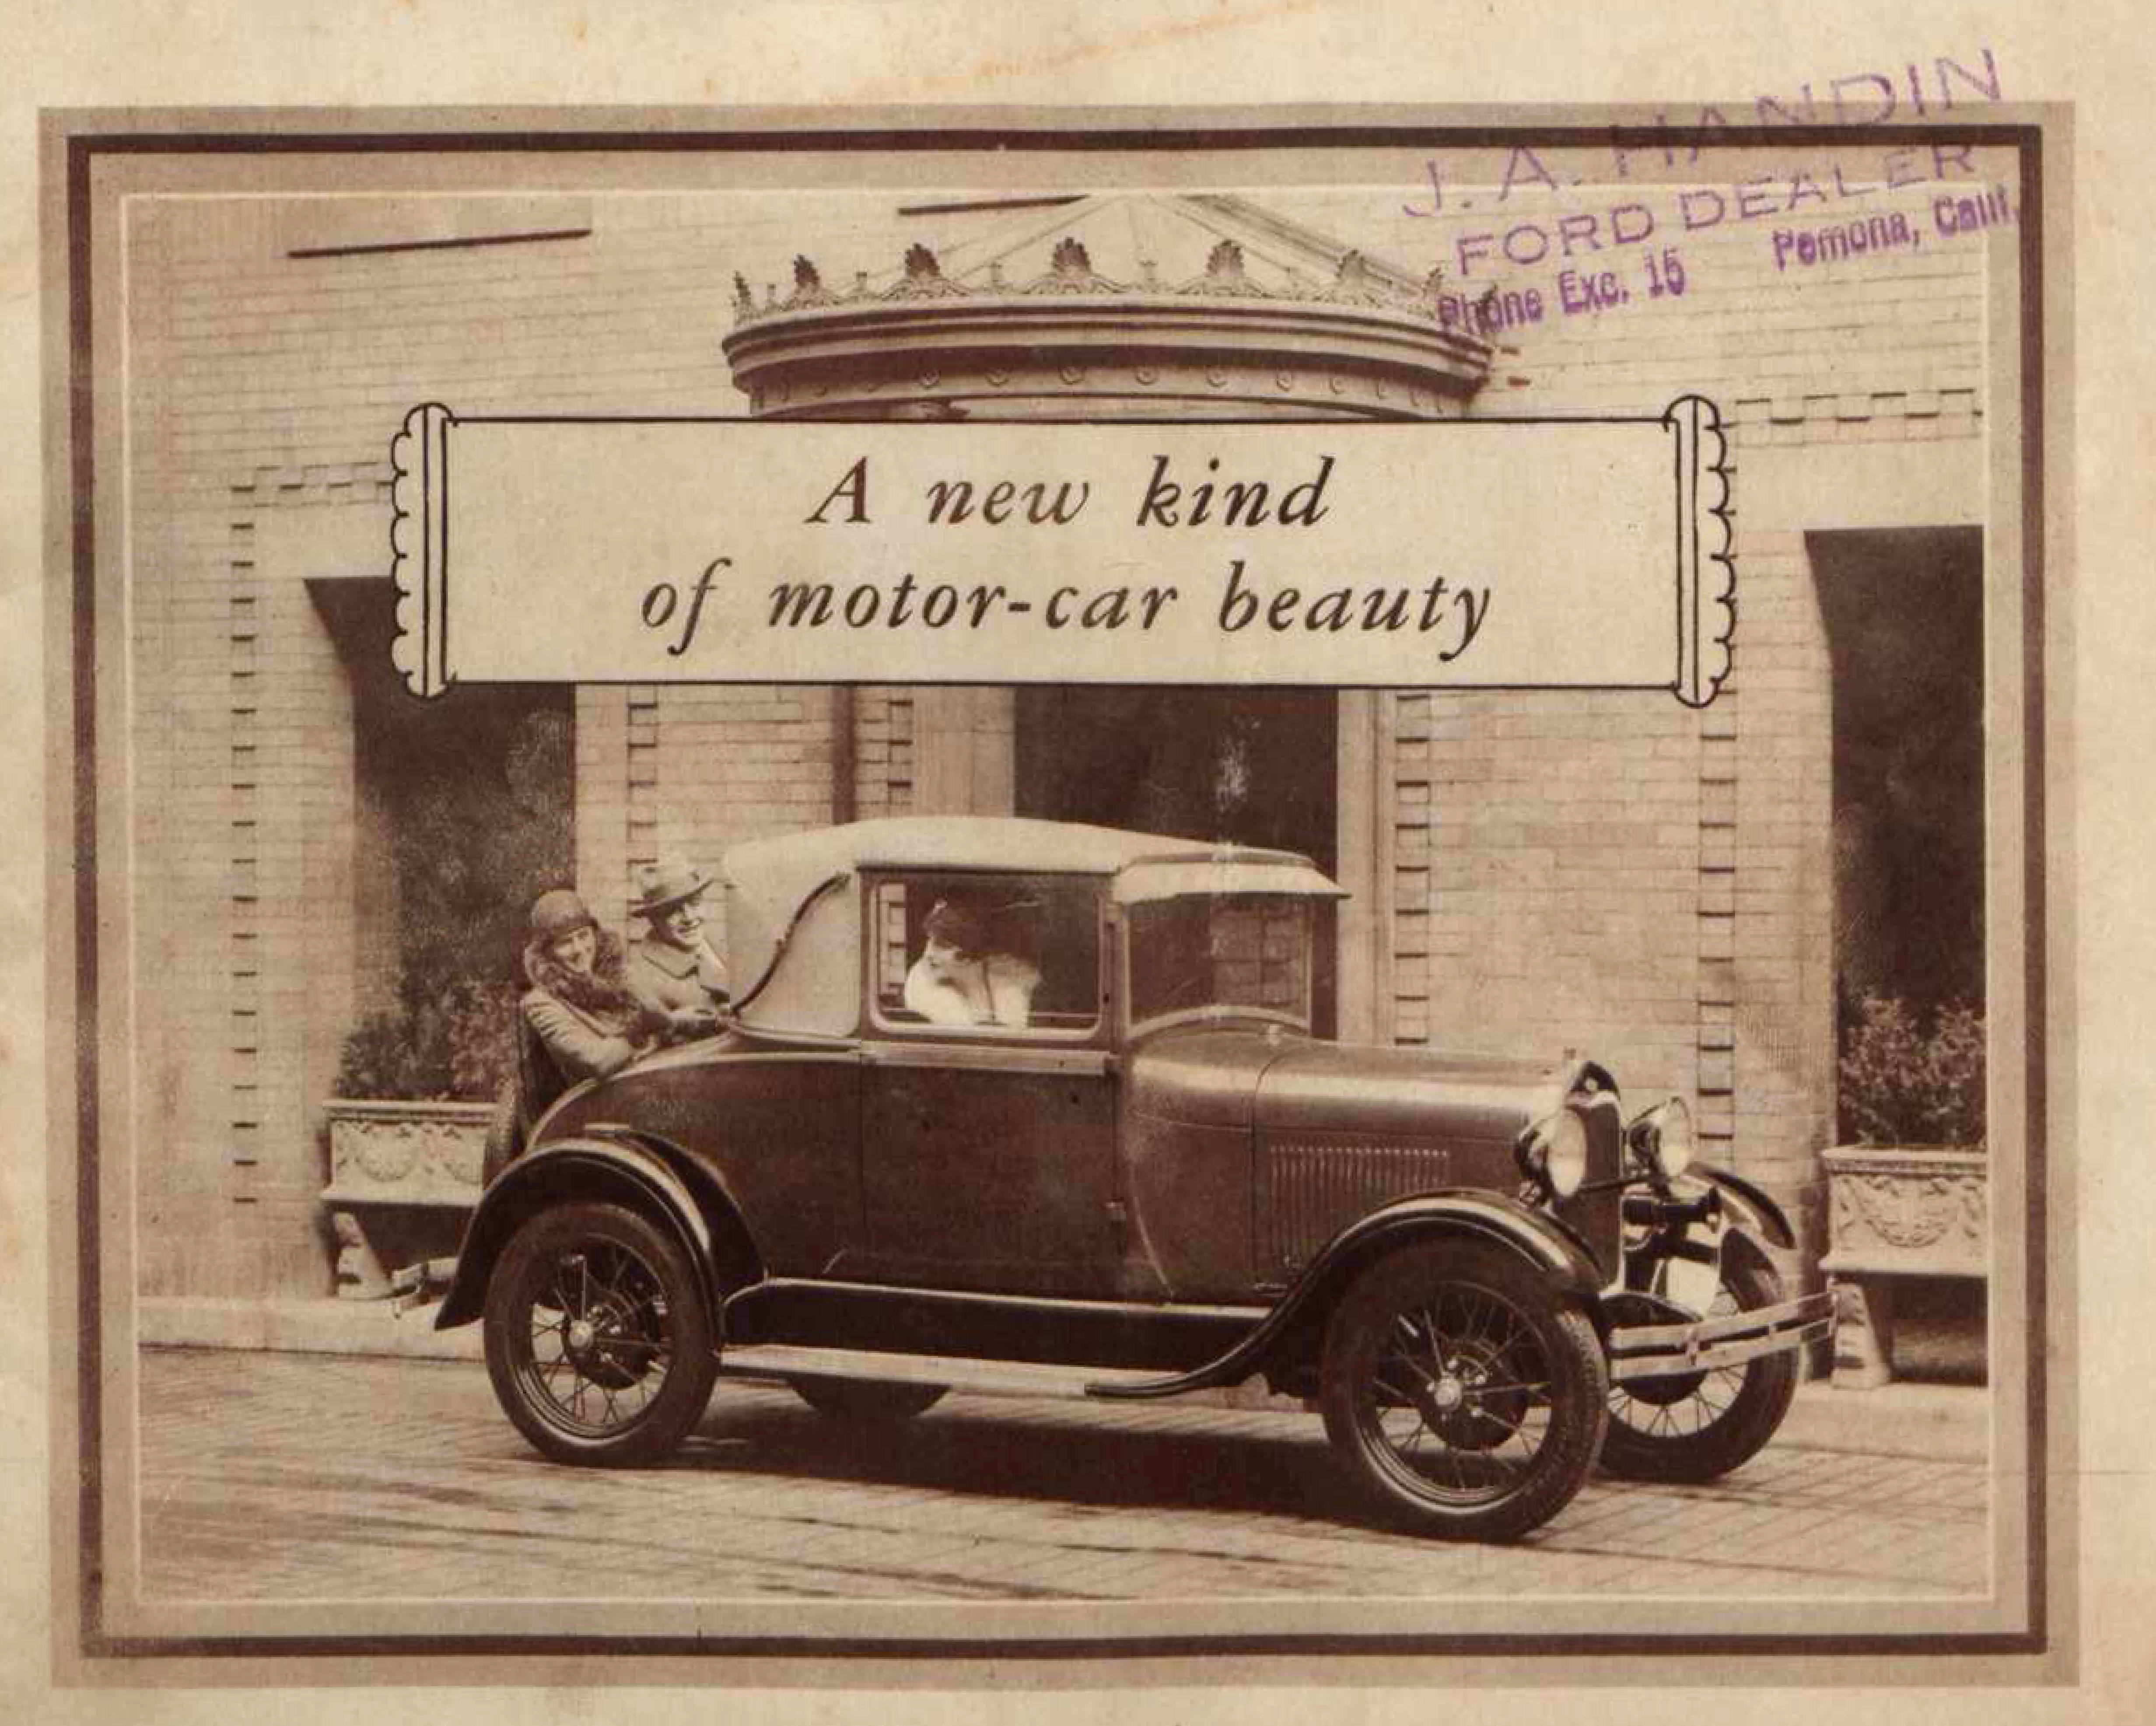 Cover of a Ford catalog titled "A new kind of motor car beauty", with black and white photograph of a Ford automobile with passengers and a driver.